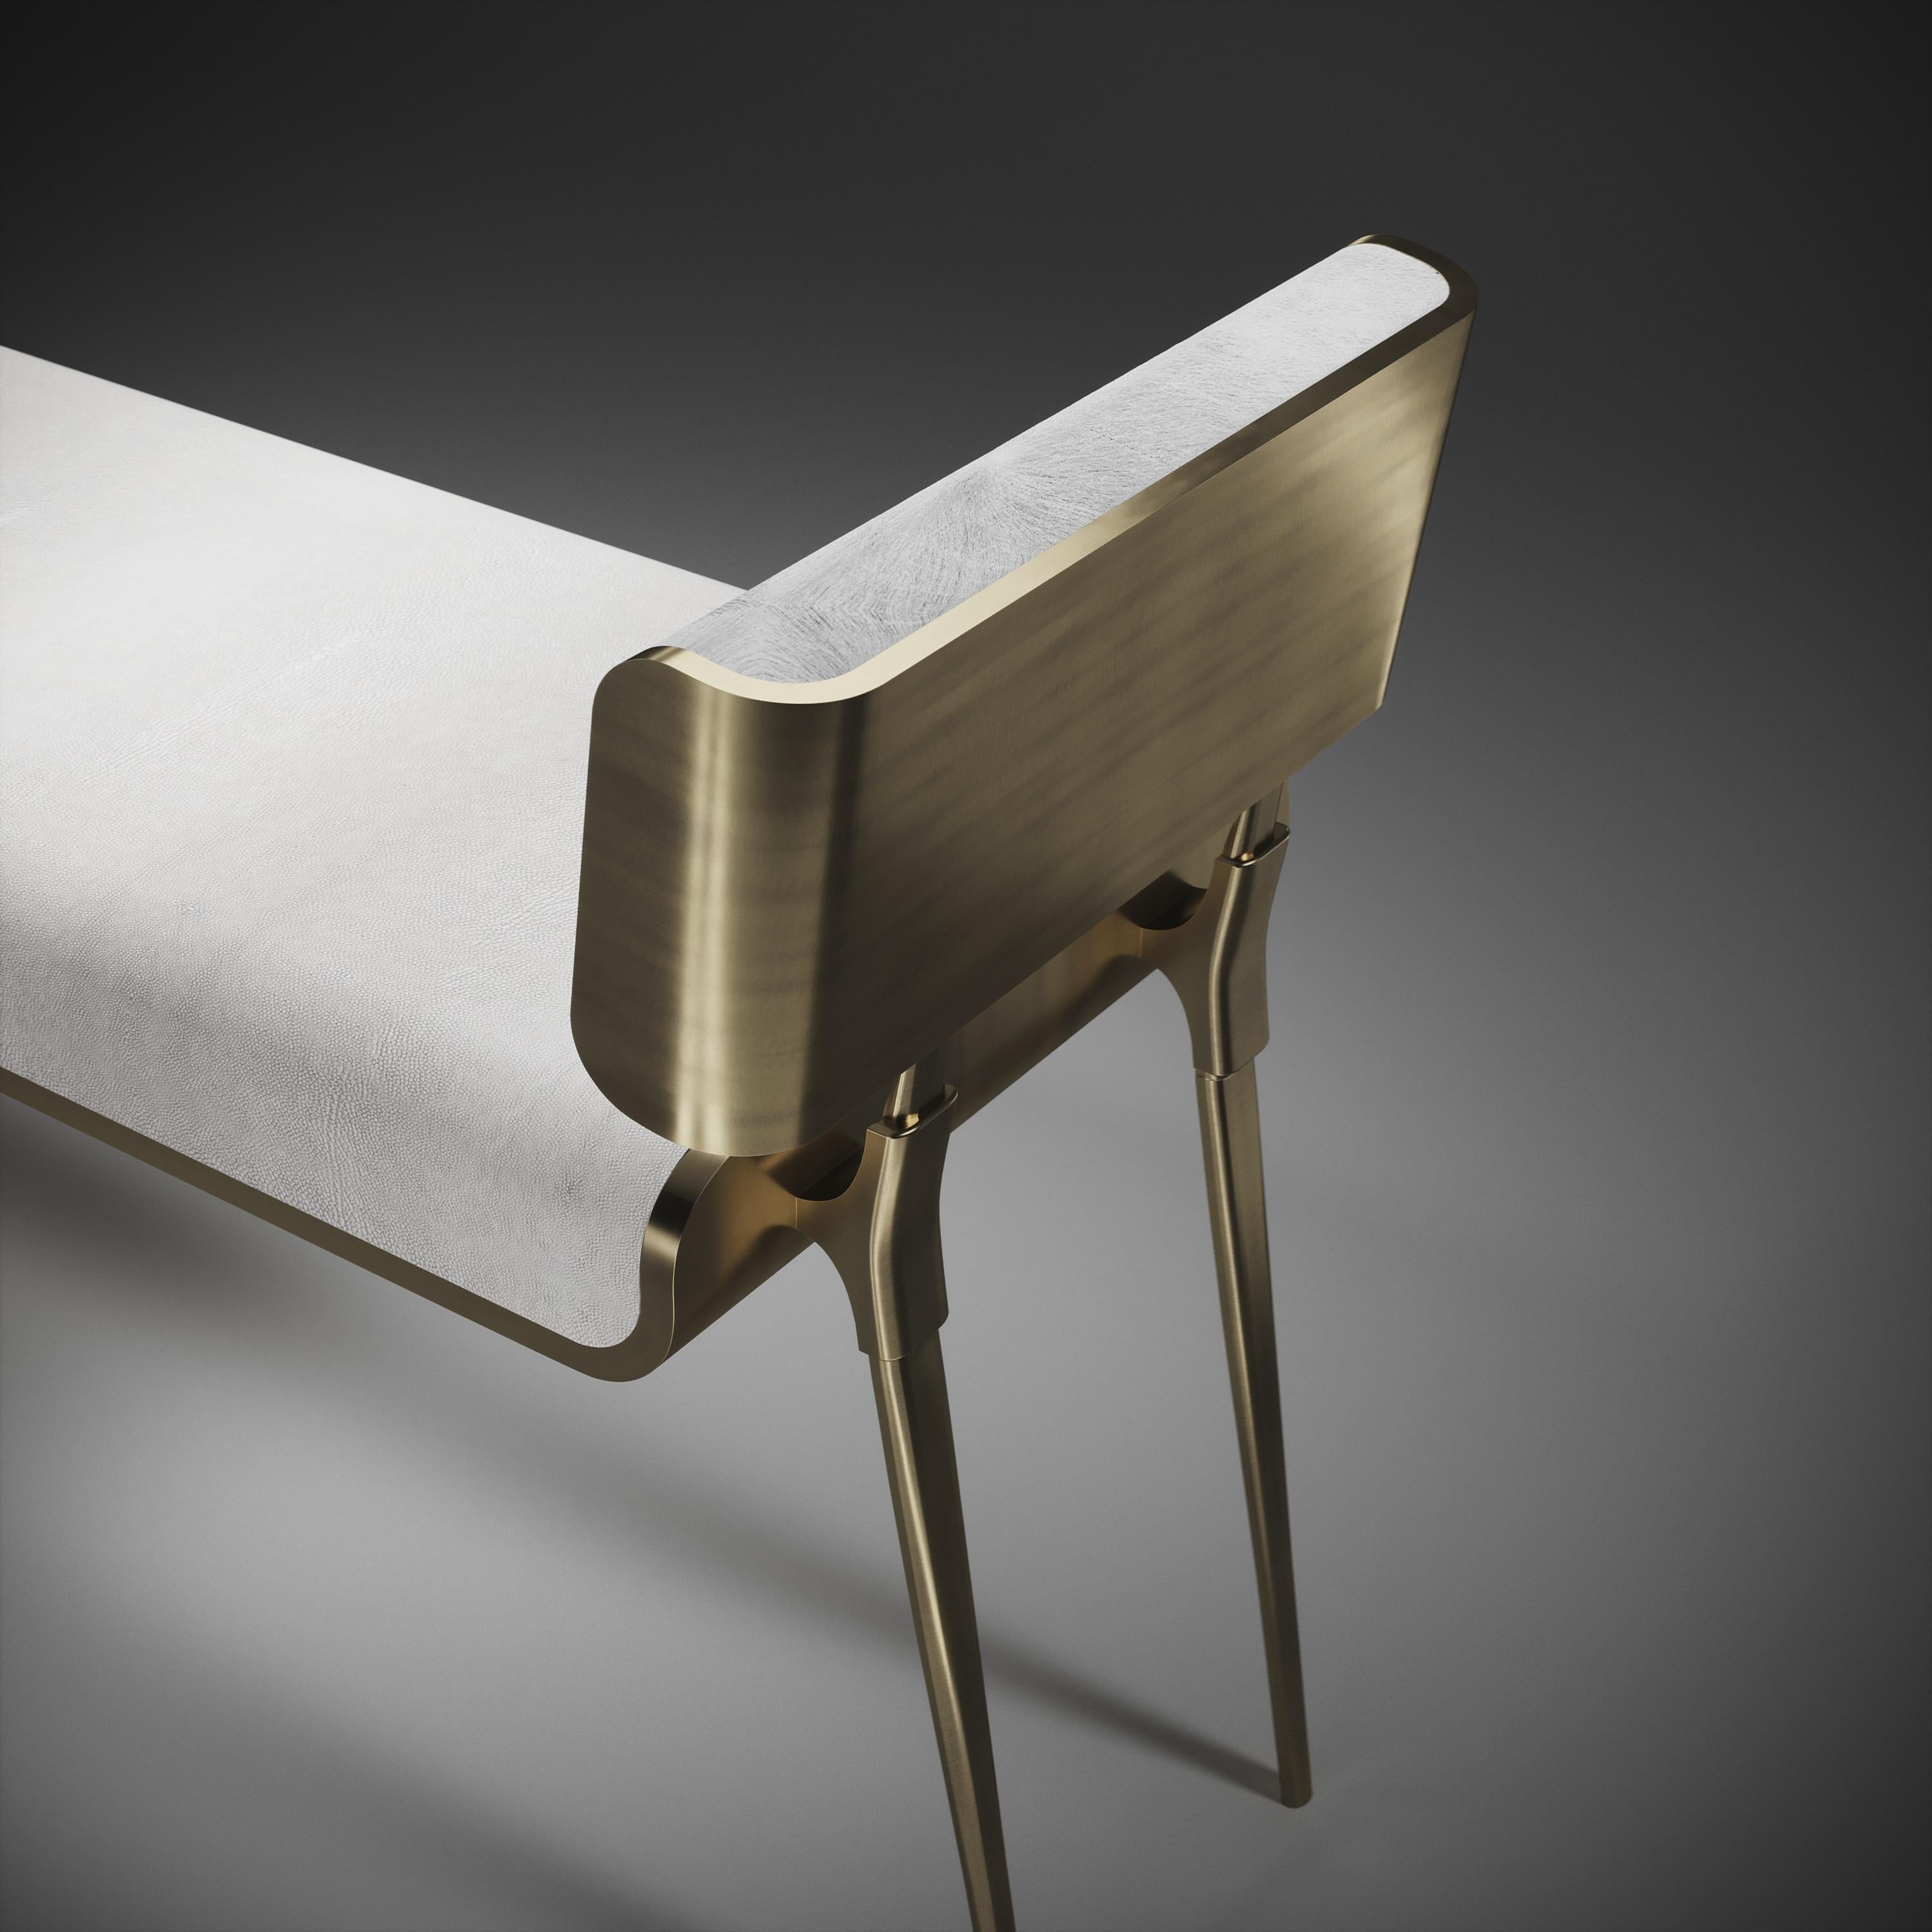 Shagreen Bench with Palmwood and Bronze-Patina Brass Details by Kifu Paris For Sale 1